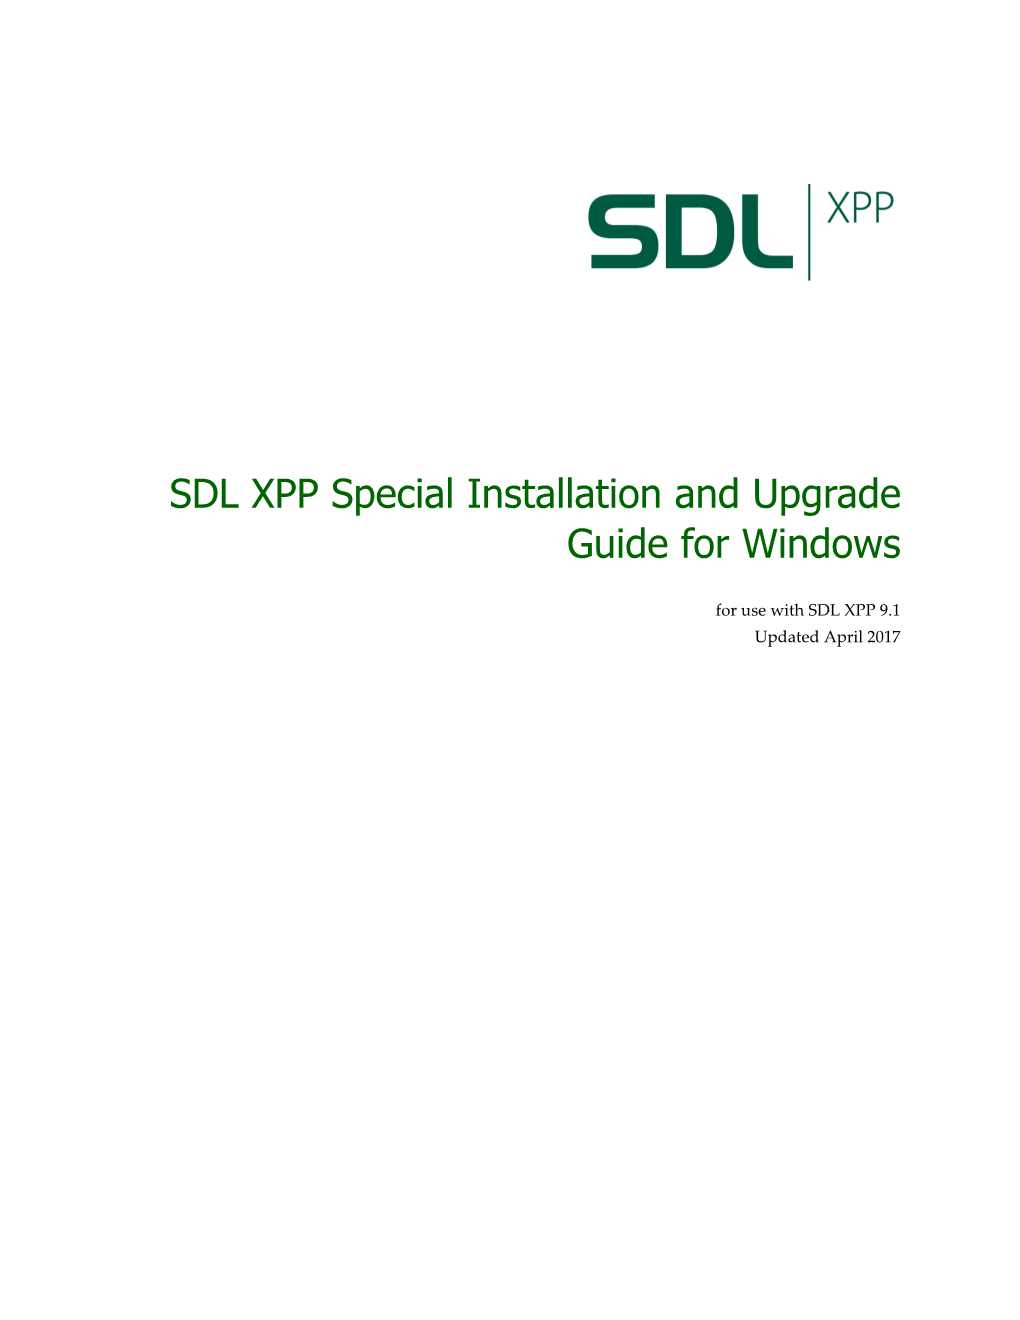 SDL XPP Special Installation and Upgrade Guide for Windows